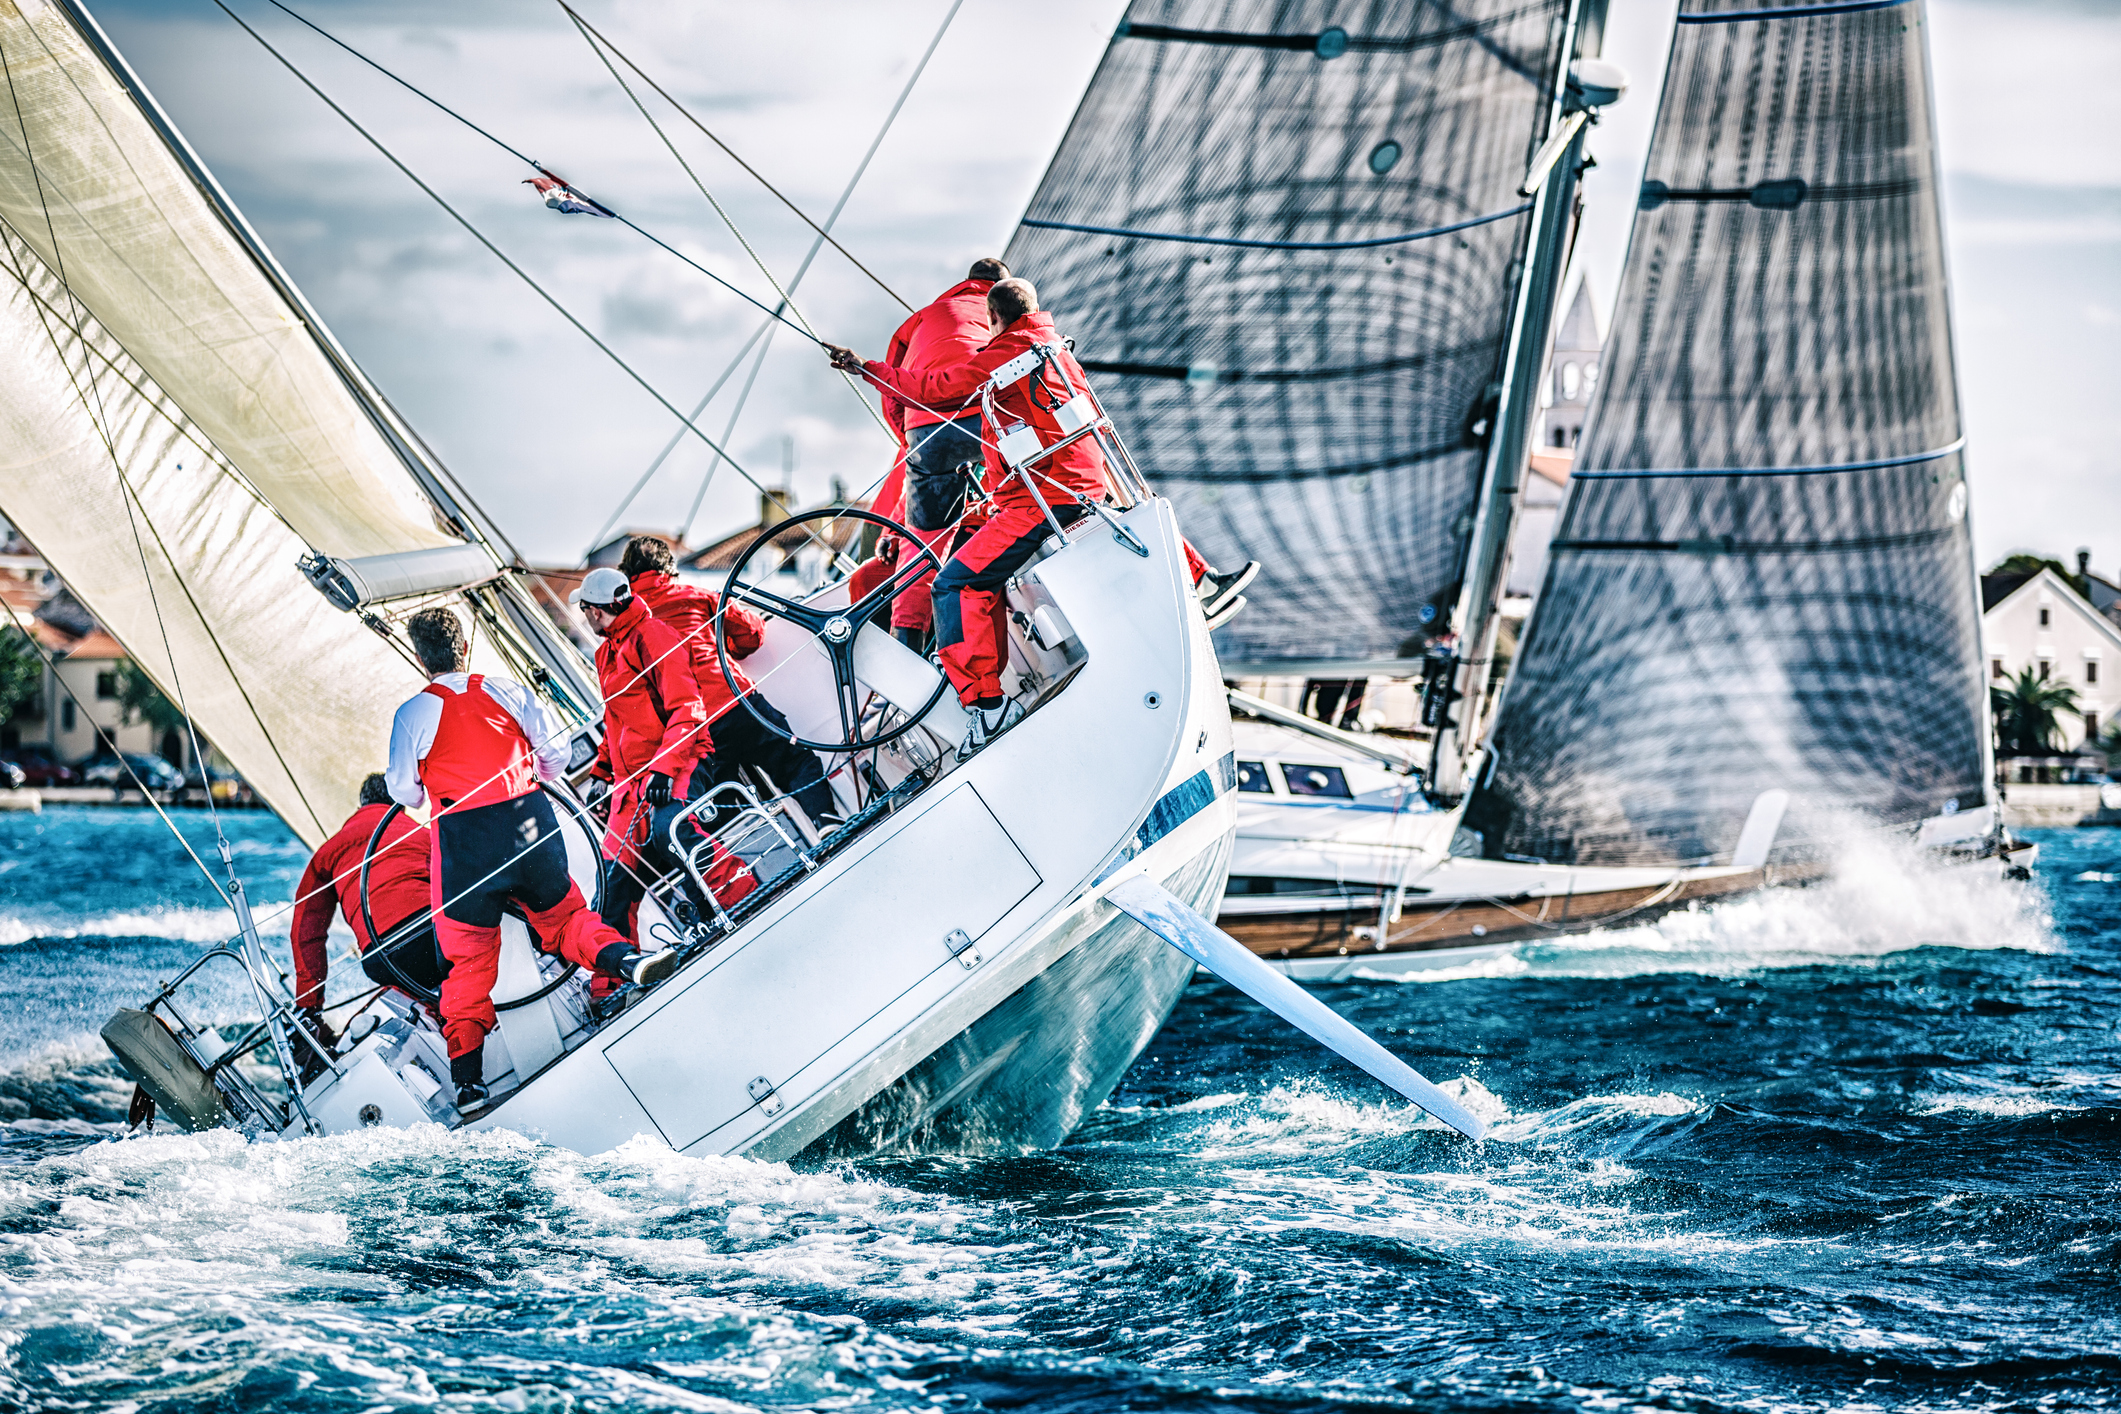 Sailboat Race tacking against the wind with crew in red foul weather gear